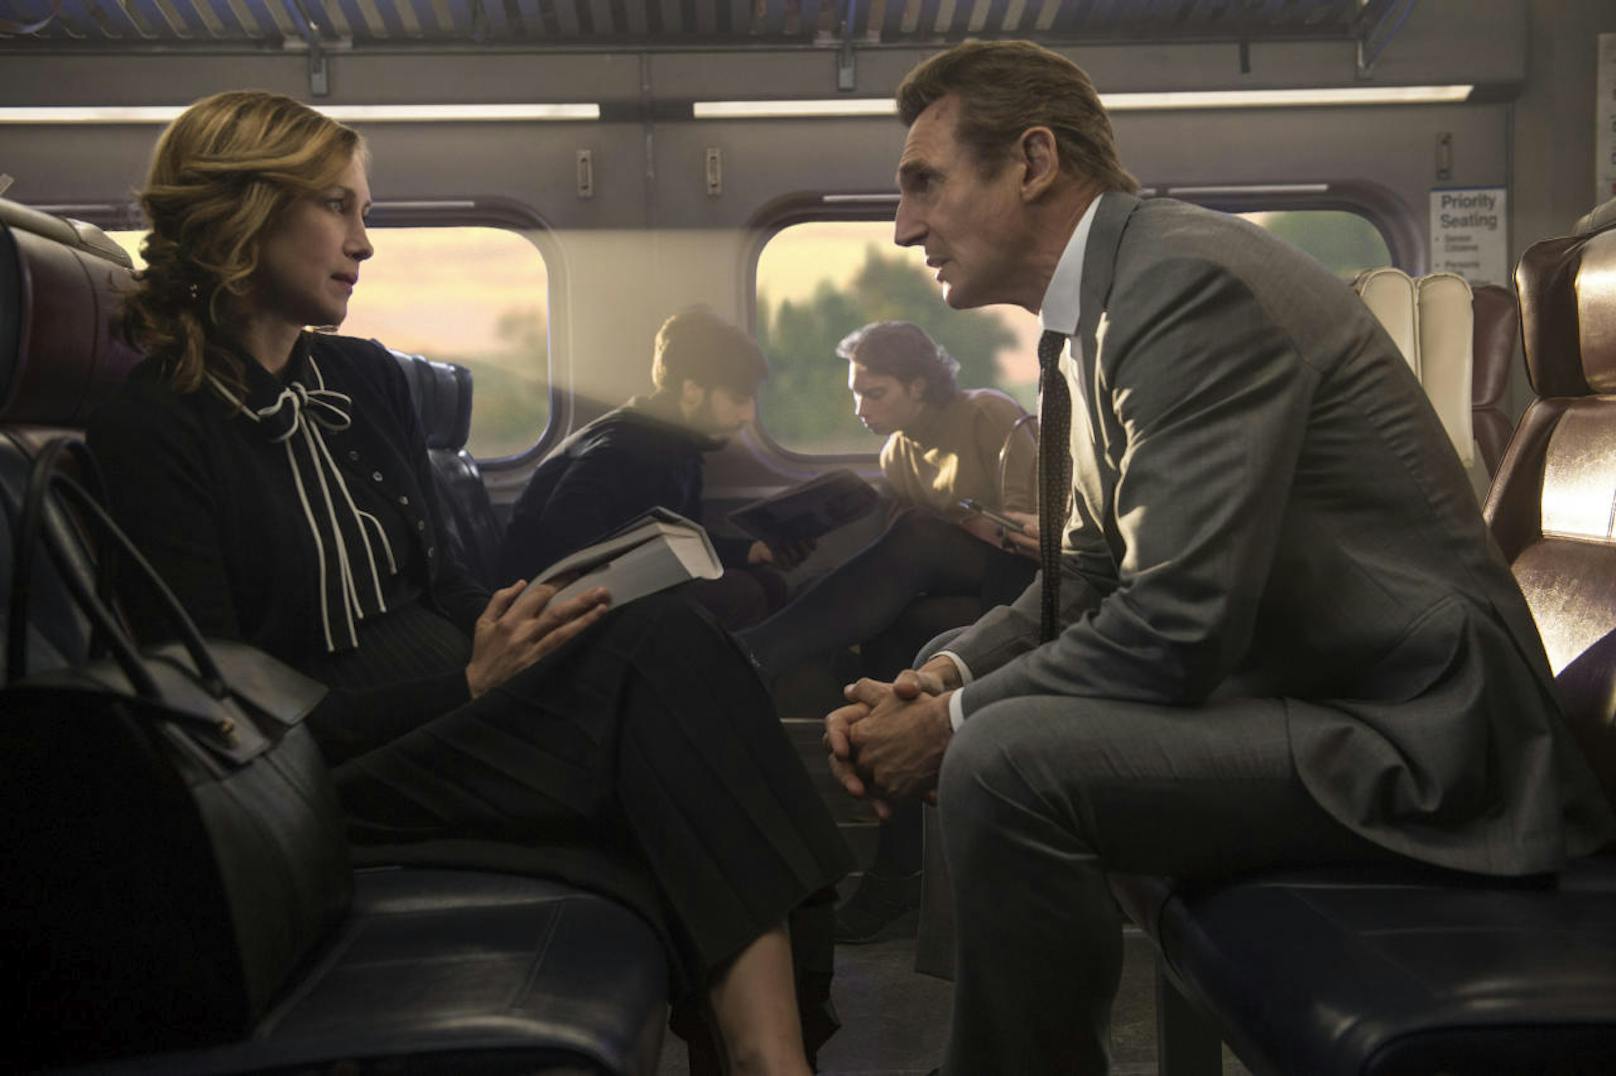 "The Commuter"